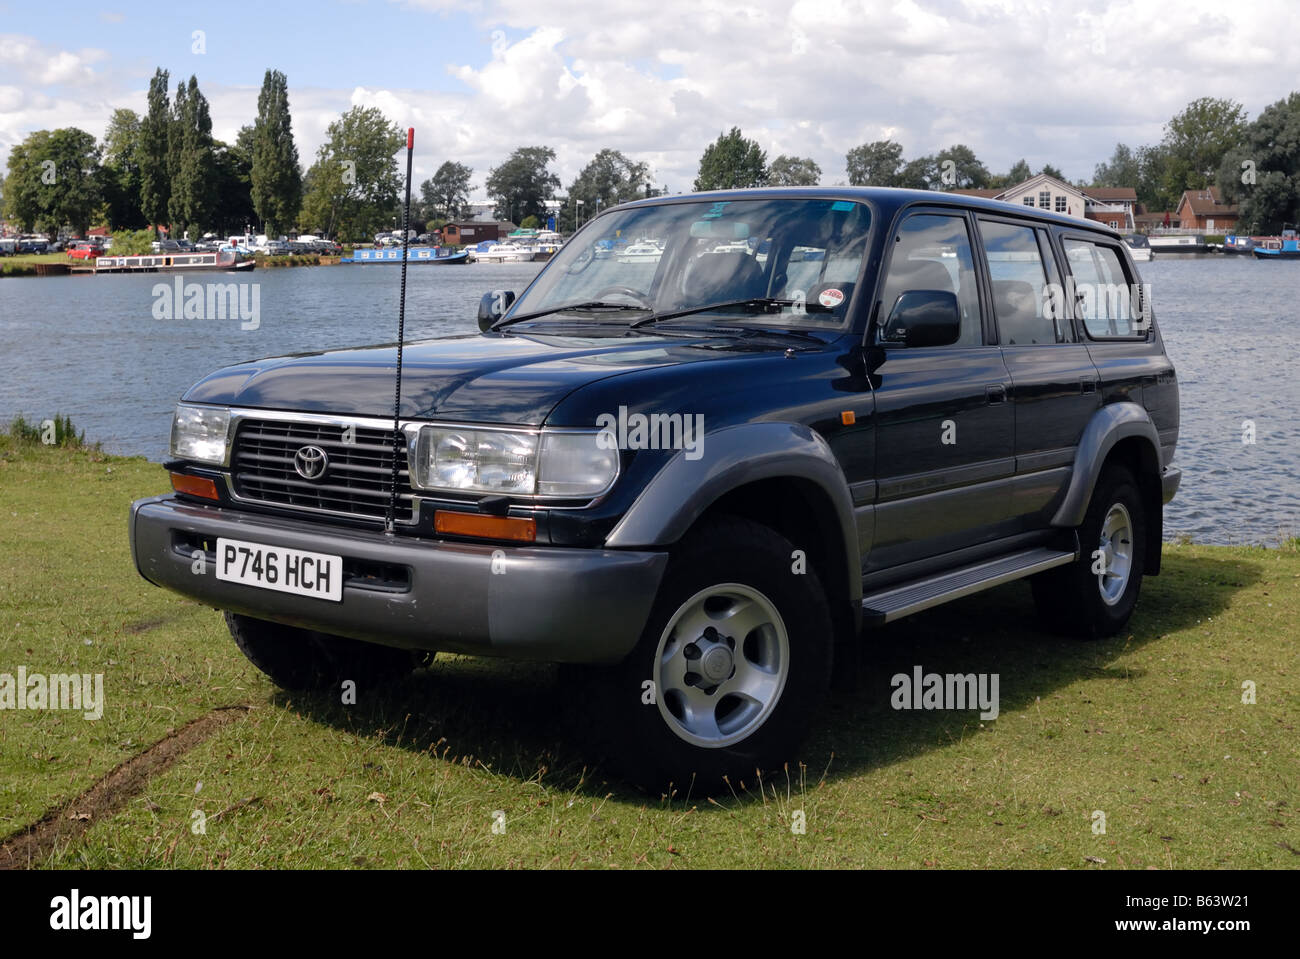 Toyota Land Cruiser Amazon long wheelbase four wheel drive Registration number P746 HCH LRM Show Billing 2008 Land Rover Monthly Stock Photo